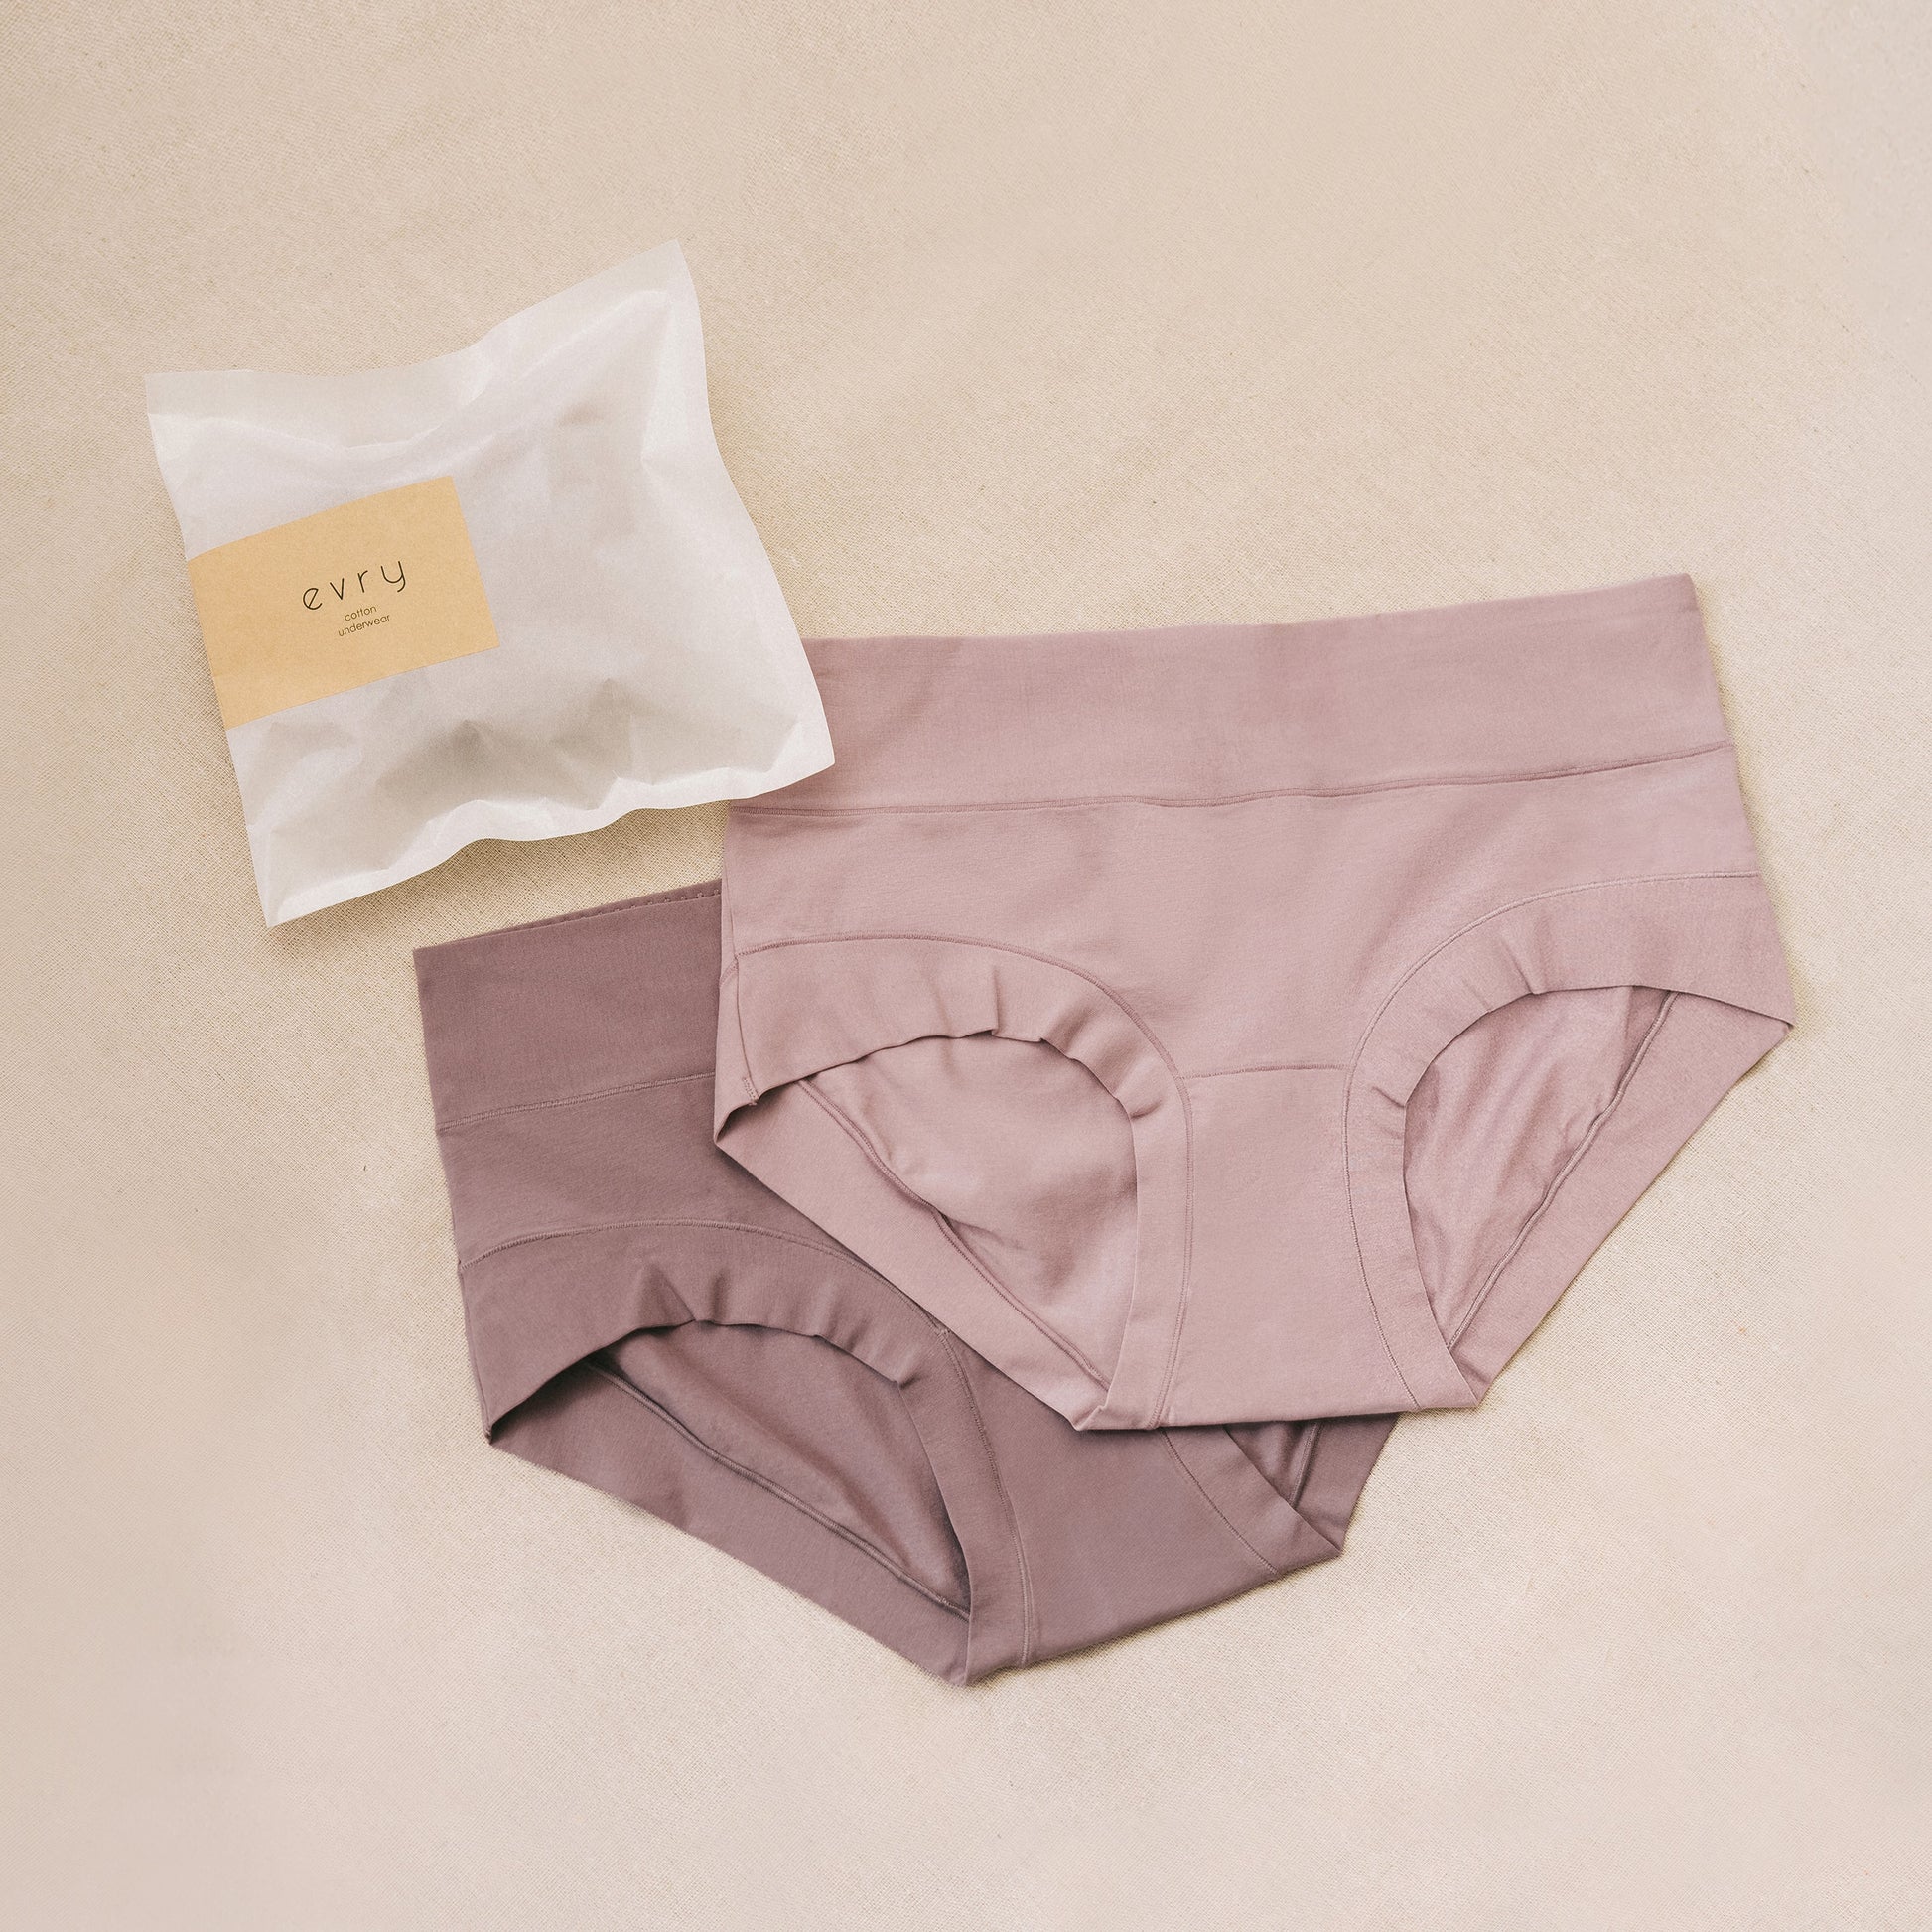 Premium Photo  Picture of woman in cotton underwear showing